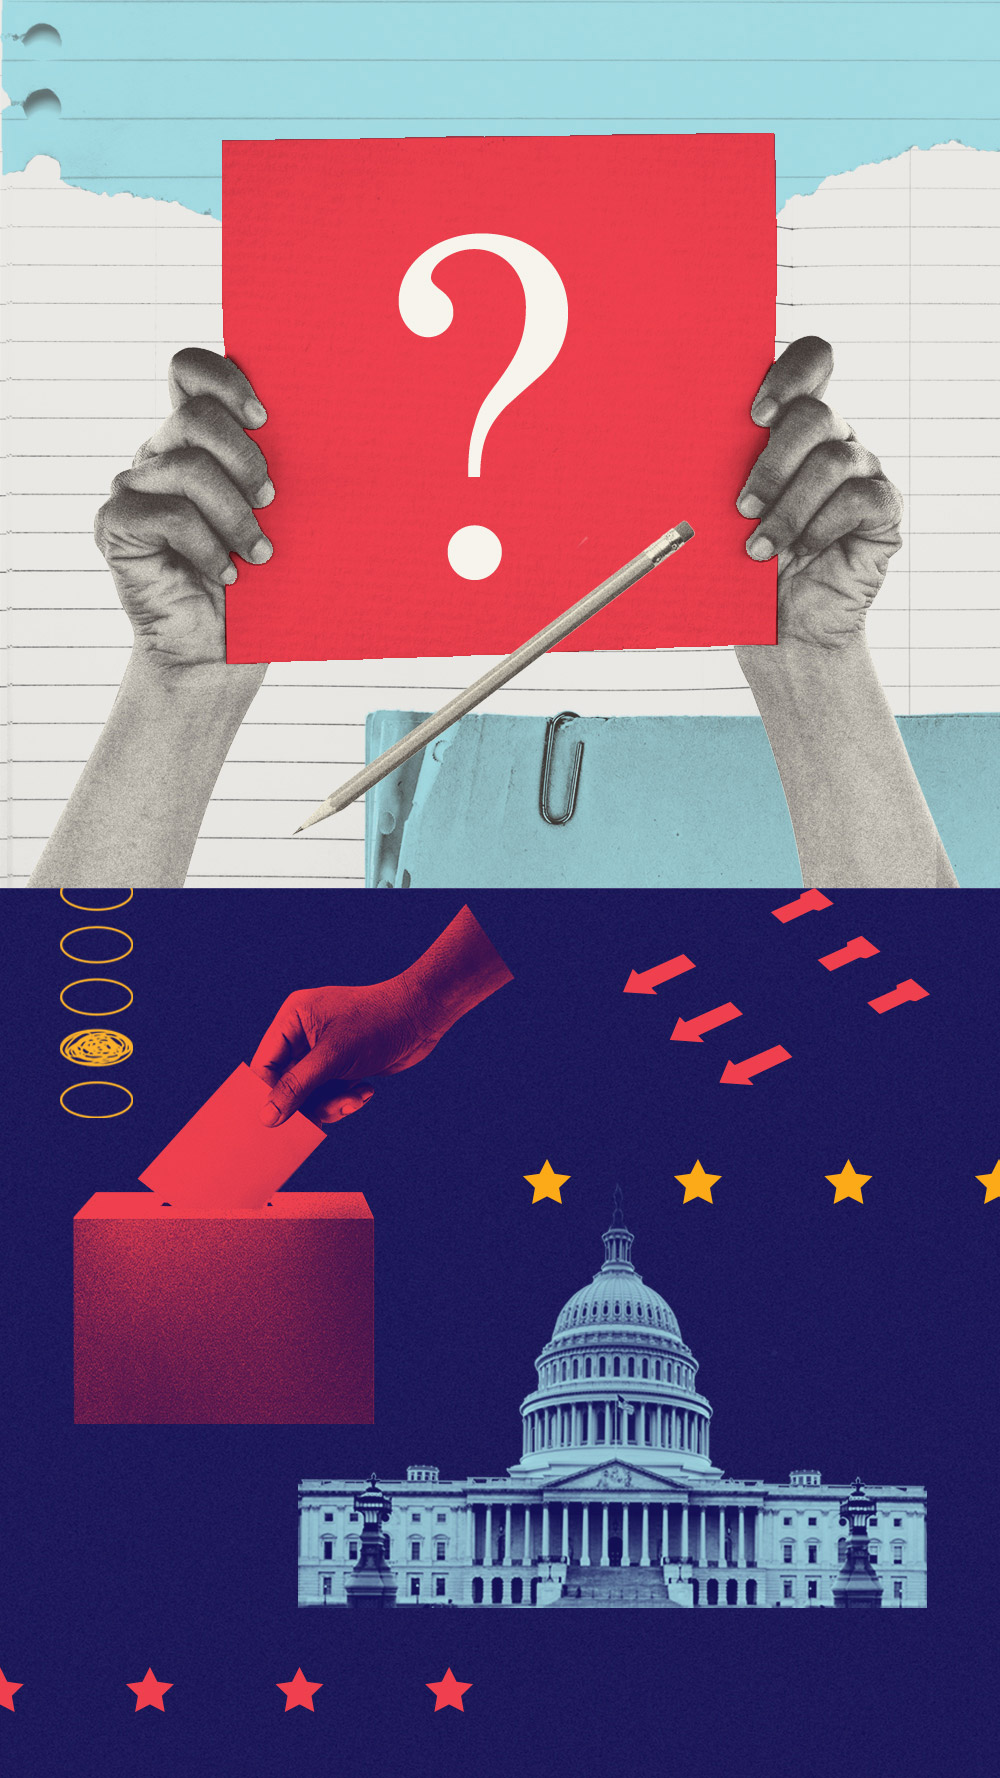 A collage of voting-related imagery including a ballot box, ballot bubbles to fill in and the U.S. Capitol building.